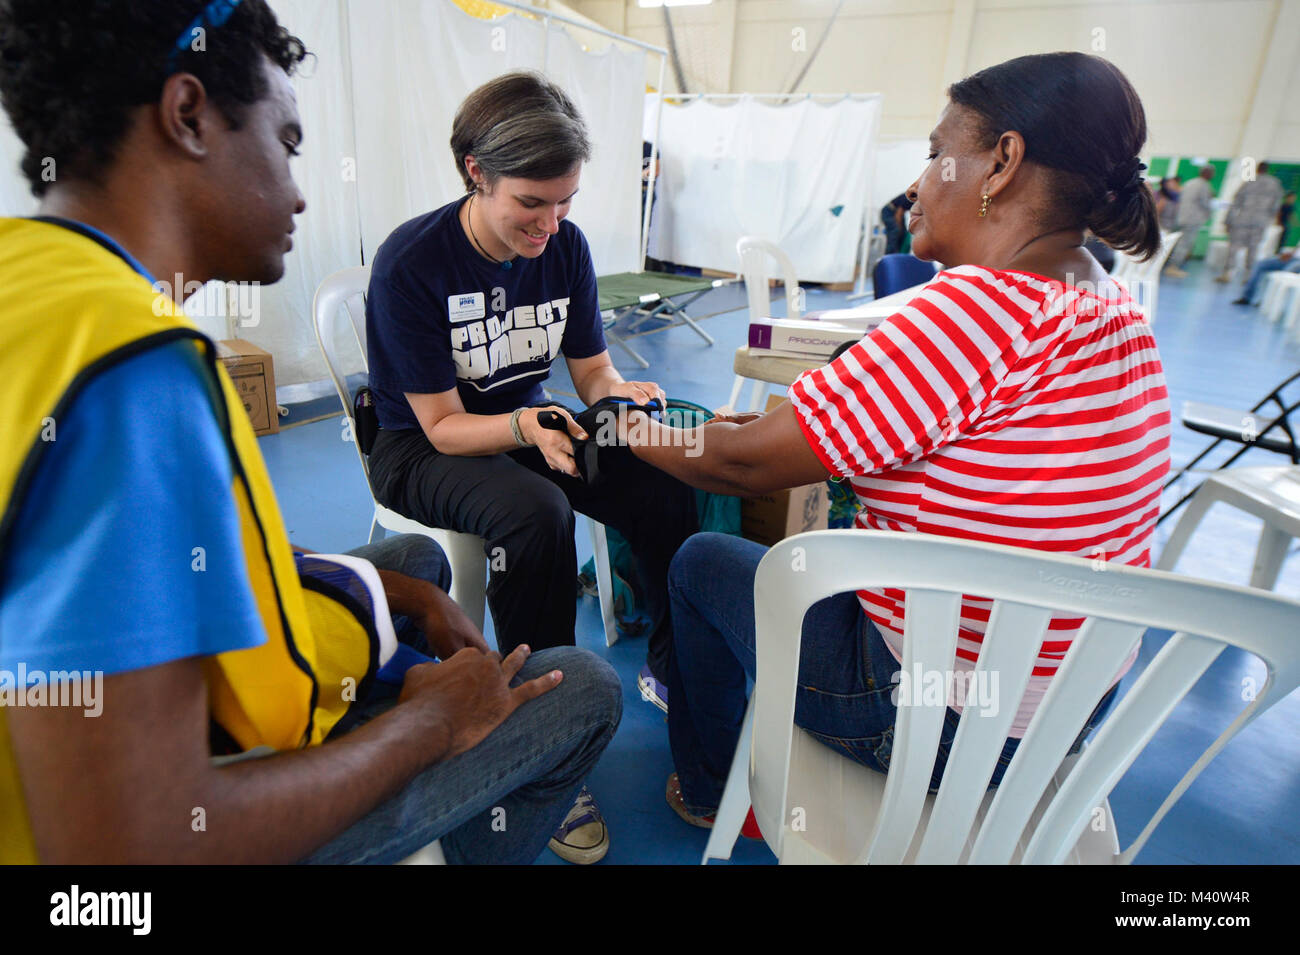 150816-N-AT101-385 SANTO DOMINGO, Dominican Republic (Aug. 16, 2015) A volunteer occupational therapist with the non-governmental organization (NGO) Project HOPE treats a patient at a medical site established at Parque del Este during Continuing Promise 2015 (CP-15). Project HOPE volunteers are working alongside other NGOs and military members during CP-15. Continuing Promise is a U.S. Southern Command-sponsored and U.S. Naval Forces Southern Command/U.S. 4th Fleet-conducted deployment to conduct civil-military operations including humanitarian-civil assistance, subject matter expert exchanges Stock Photo